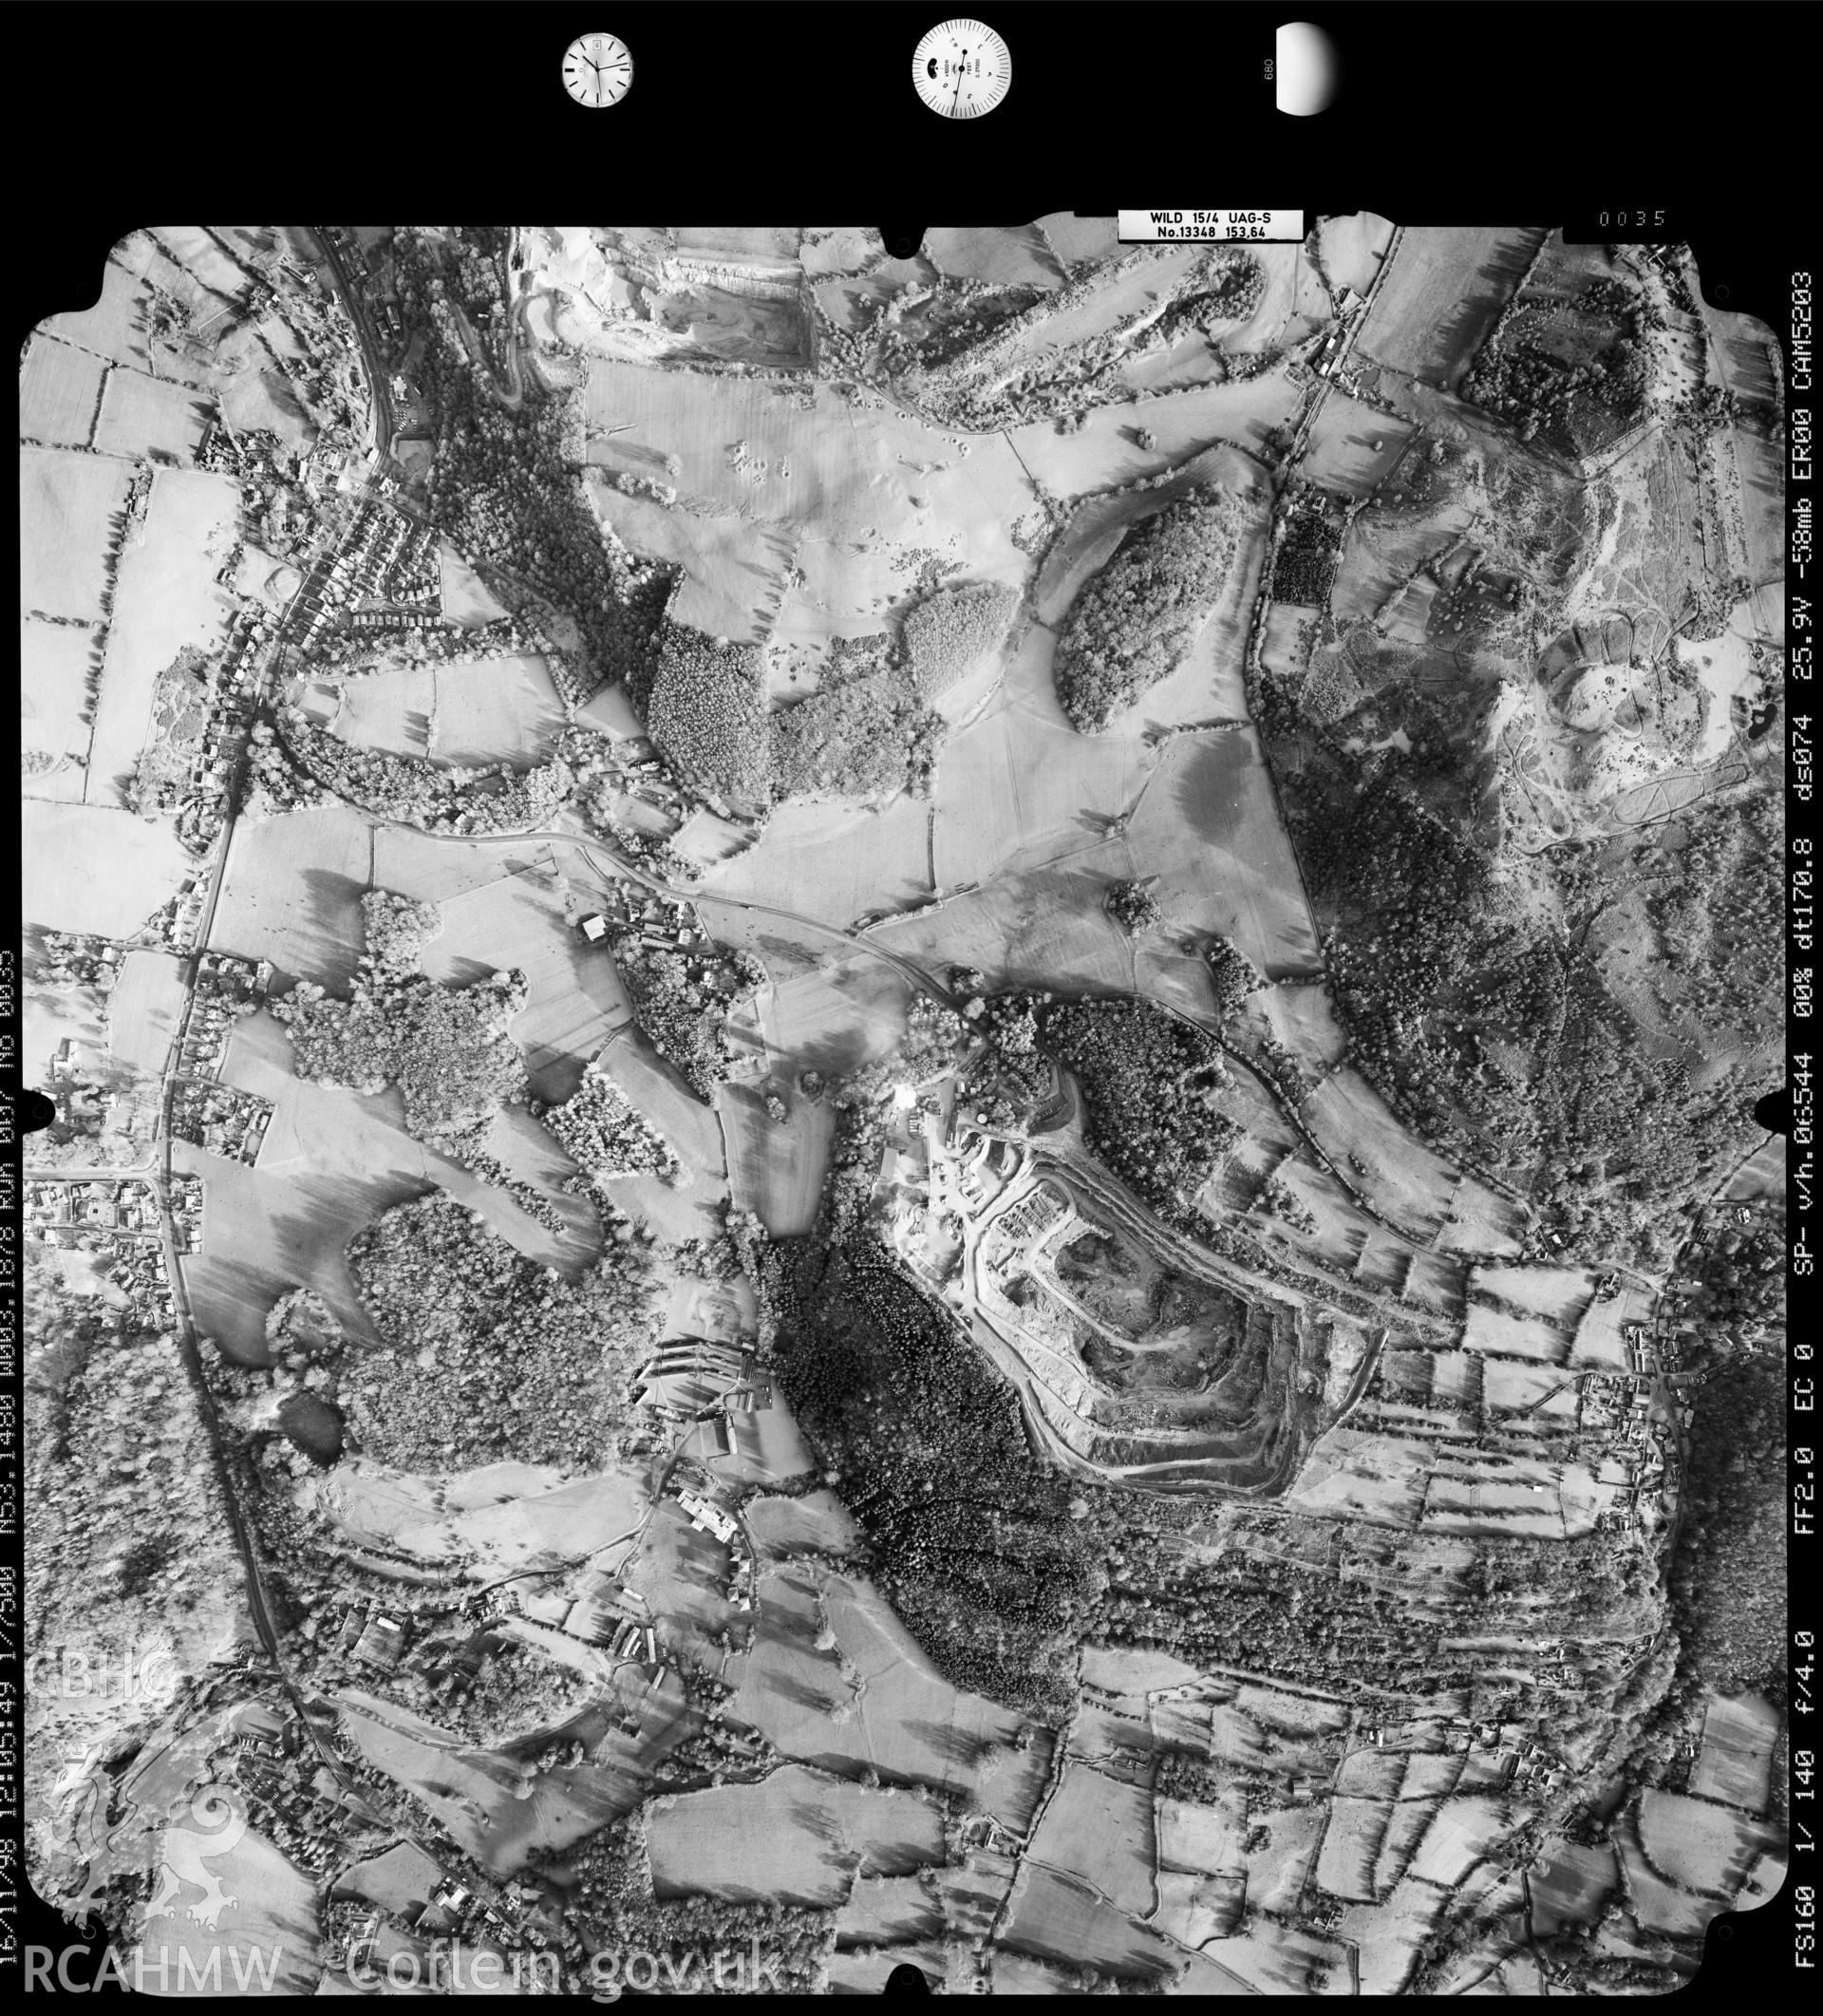 Digitized copy of an aerial photograph showing the area around Cadole, taken by Ordnance Survey, 1998.